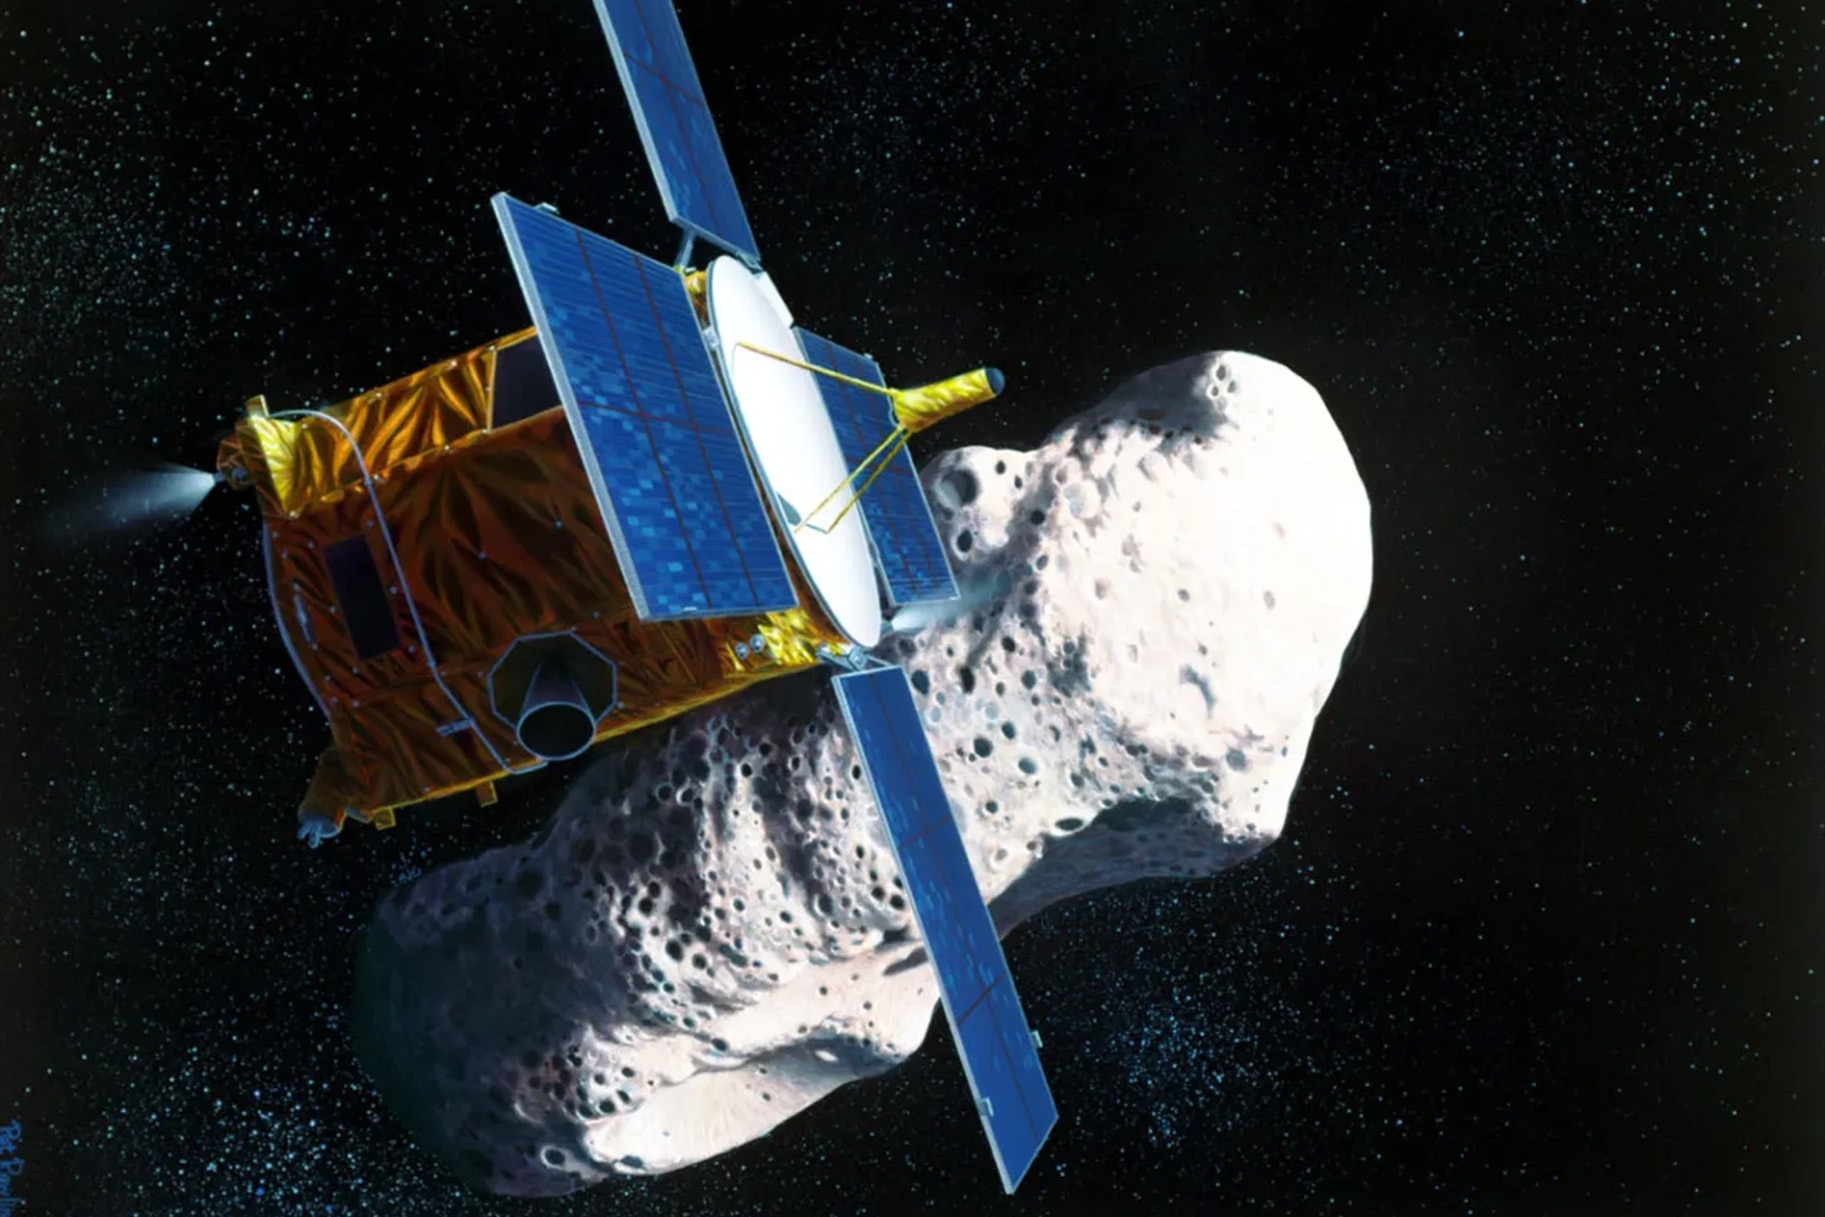 An illustration of NASA's Near Earth Asteroid Rendezvous (NEAR) spacecraft at asteroid Eros.